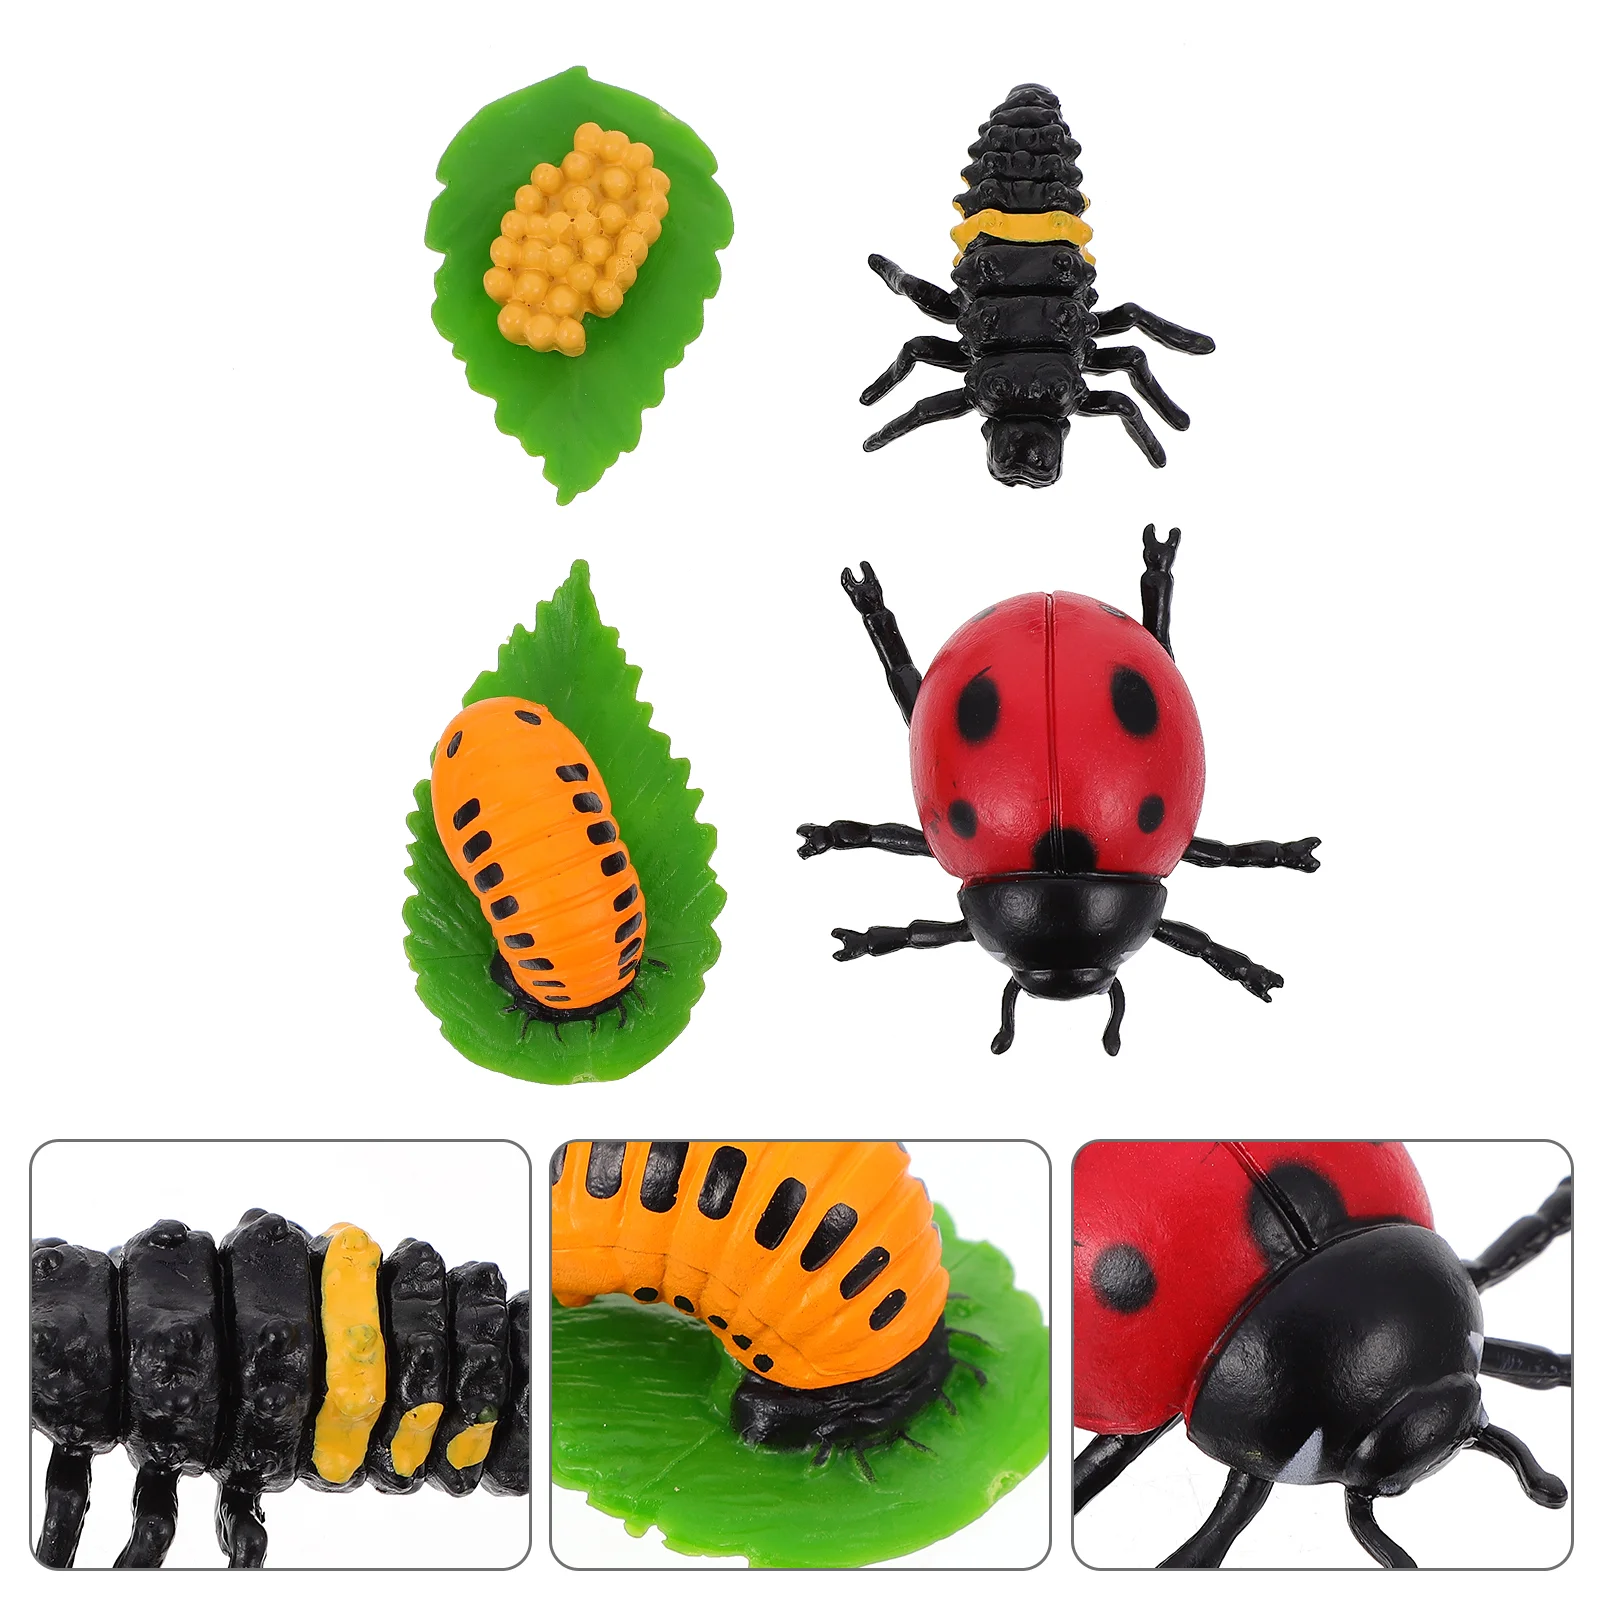 

Ladybug Growth Ornaments Insect Figurines Life Cycle Toy Statue Kids Gift Sea Turtle Gifts